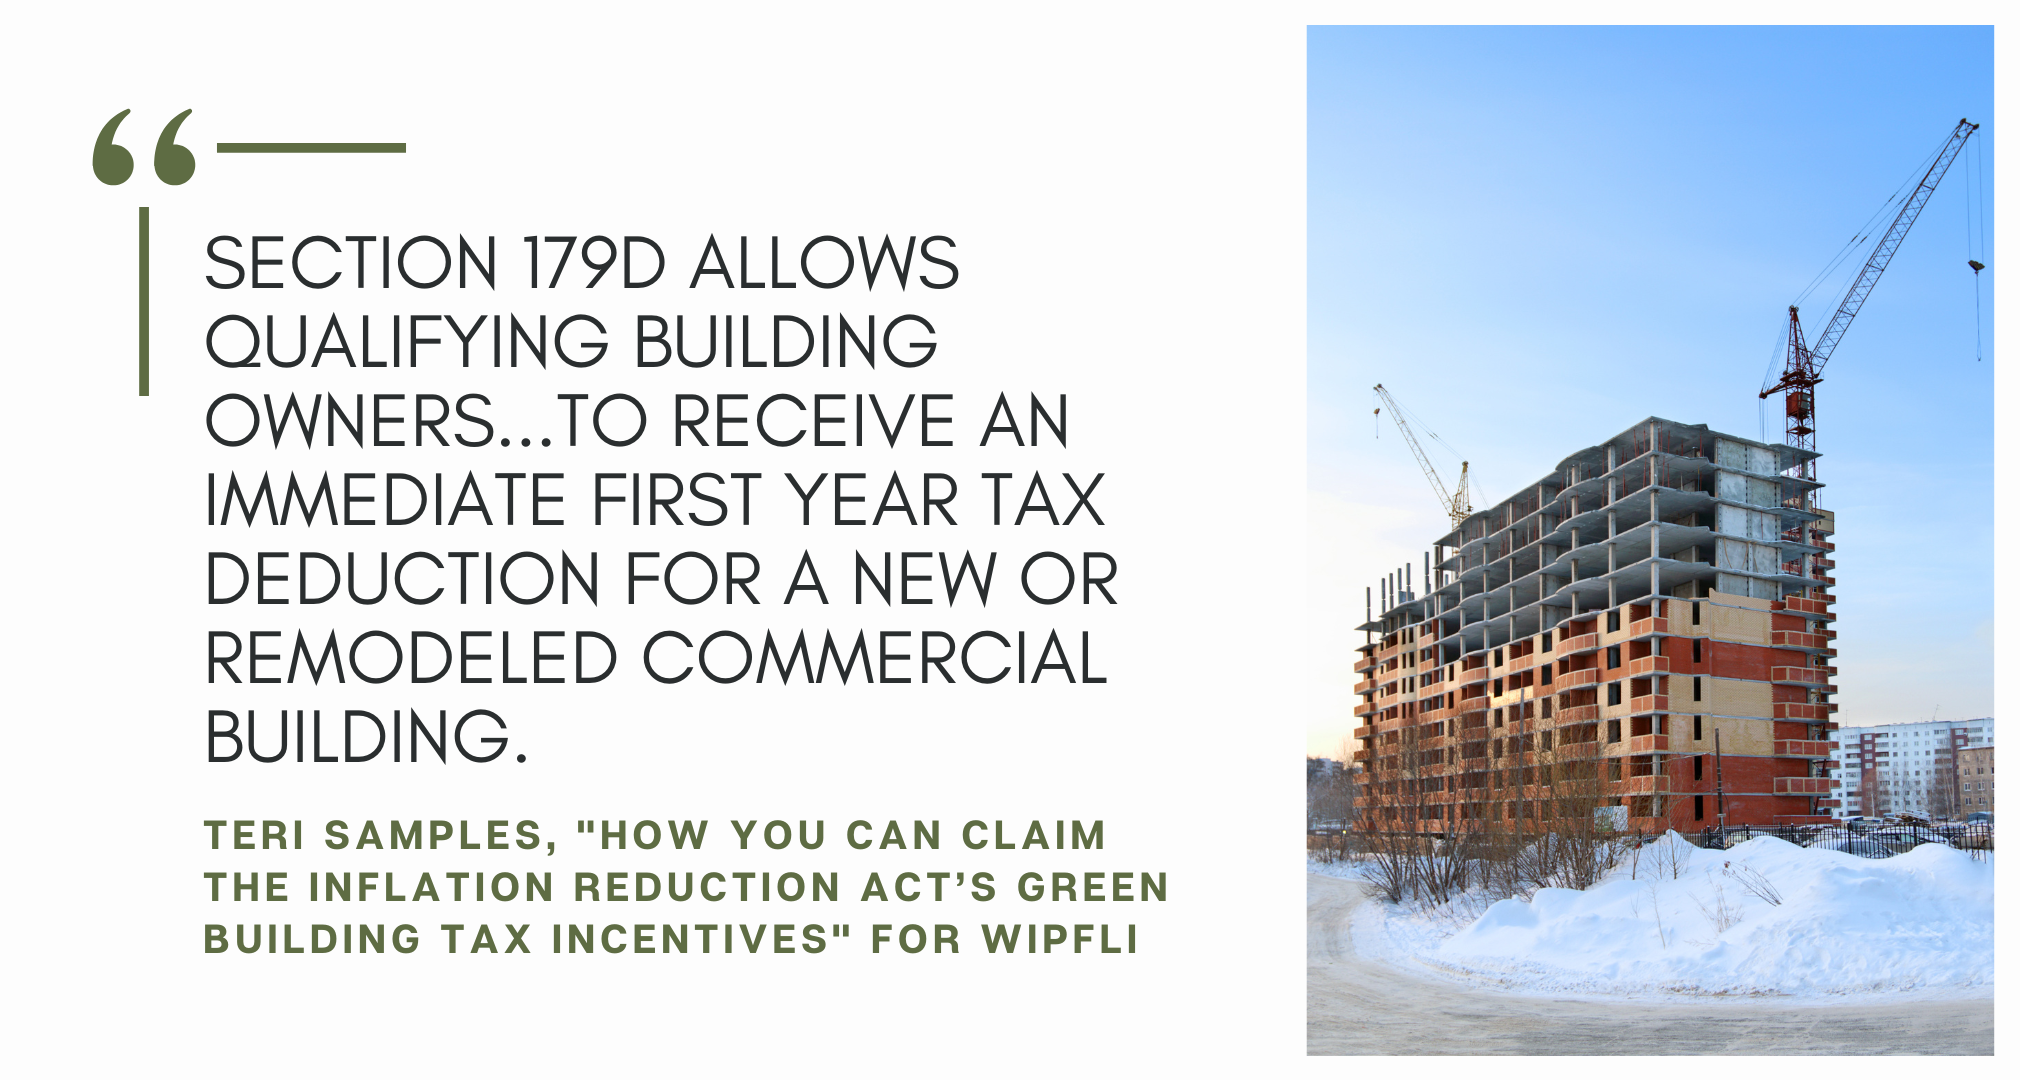 There are dozens of green building tax credits and deductions available to green building owners and developers